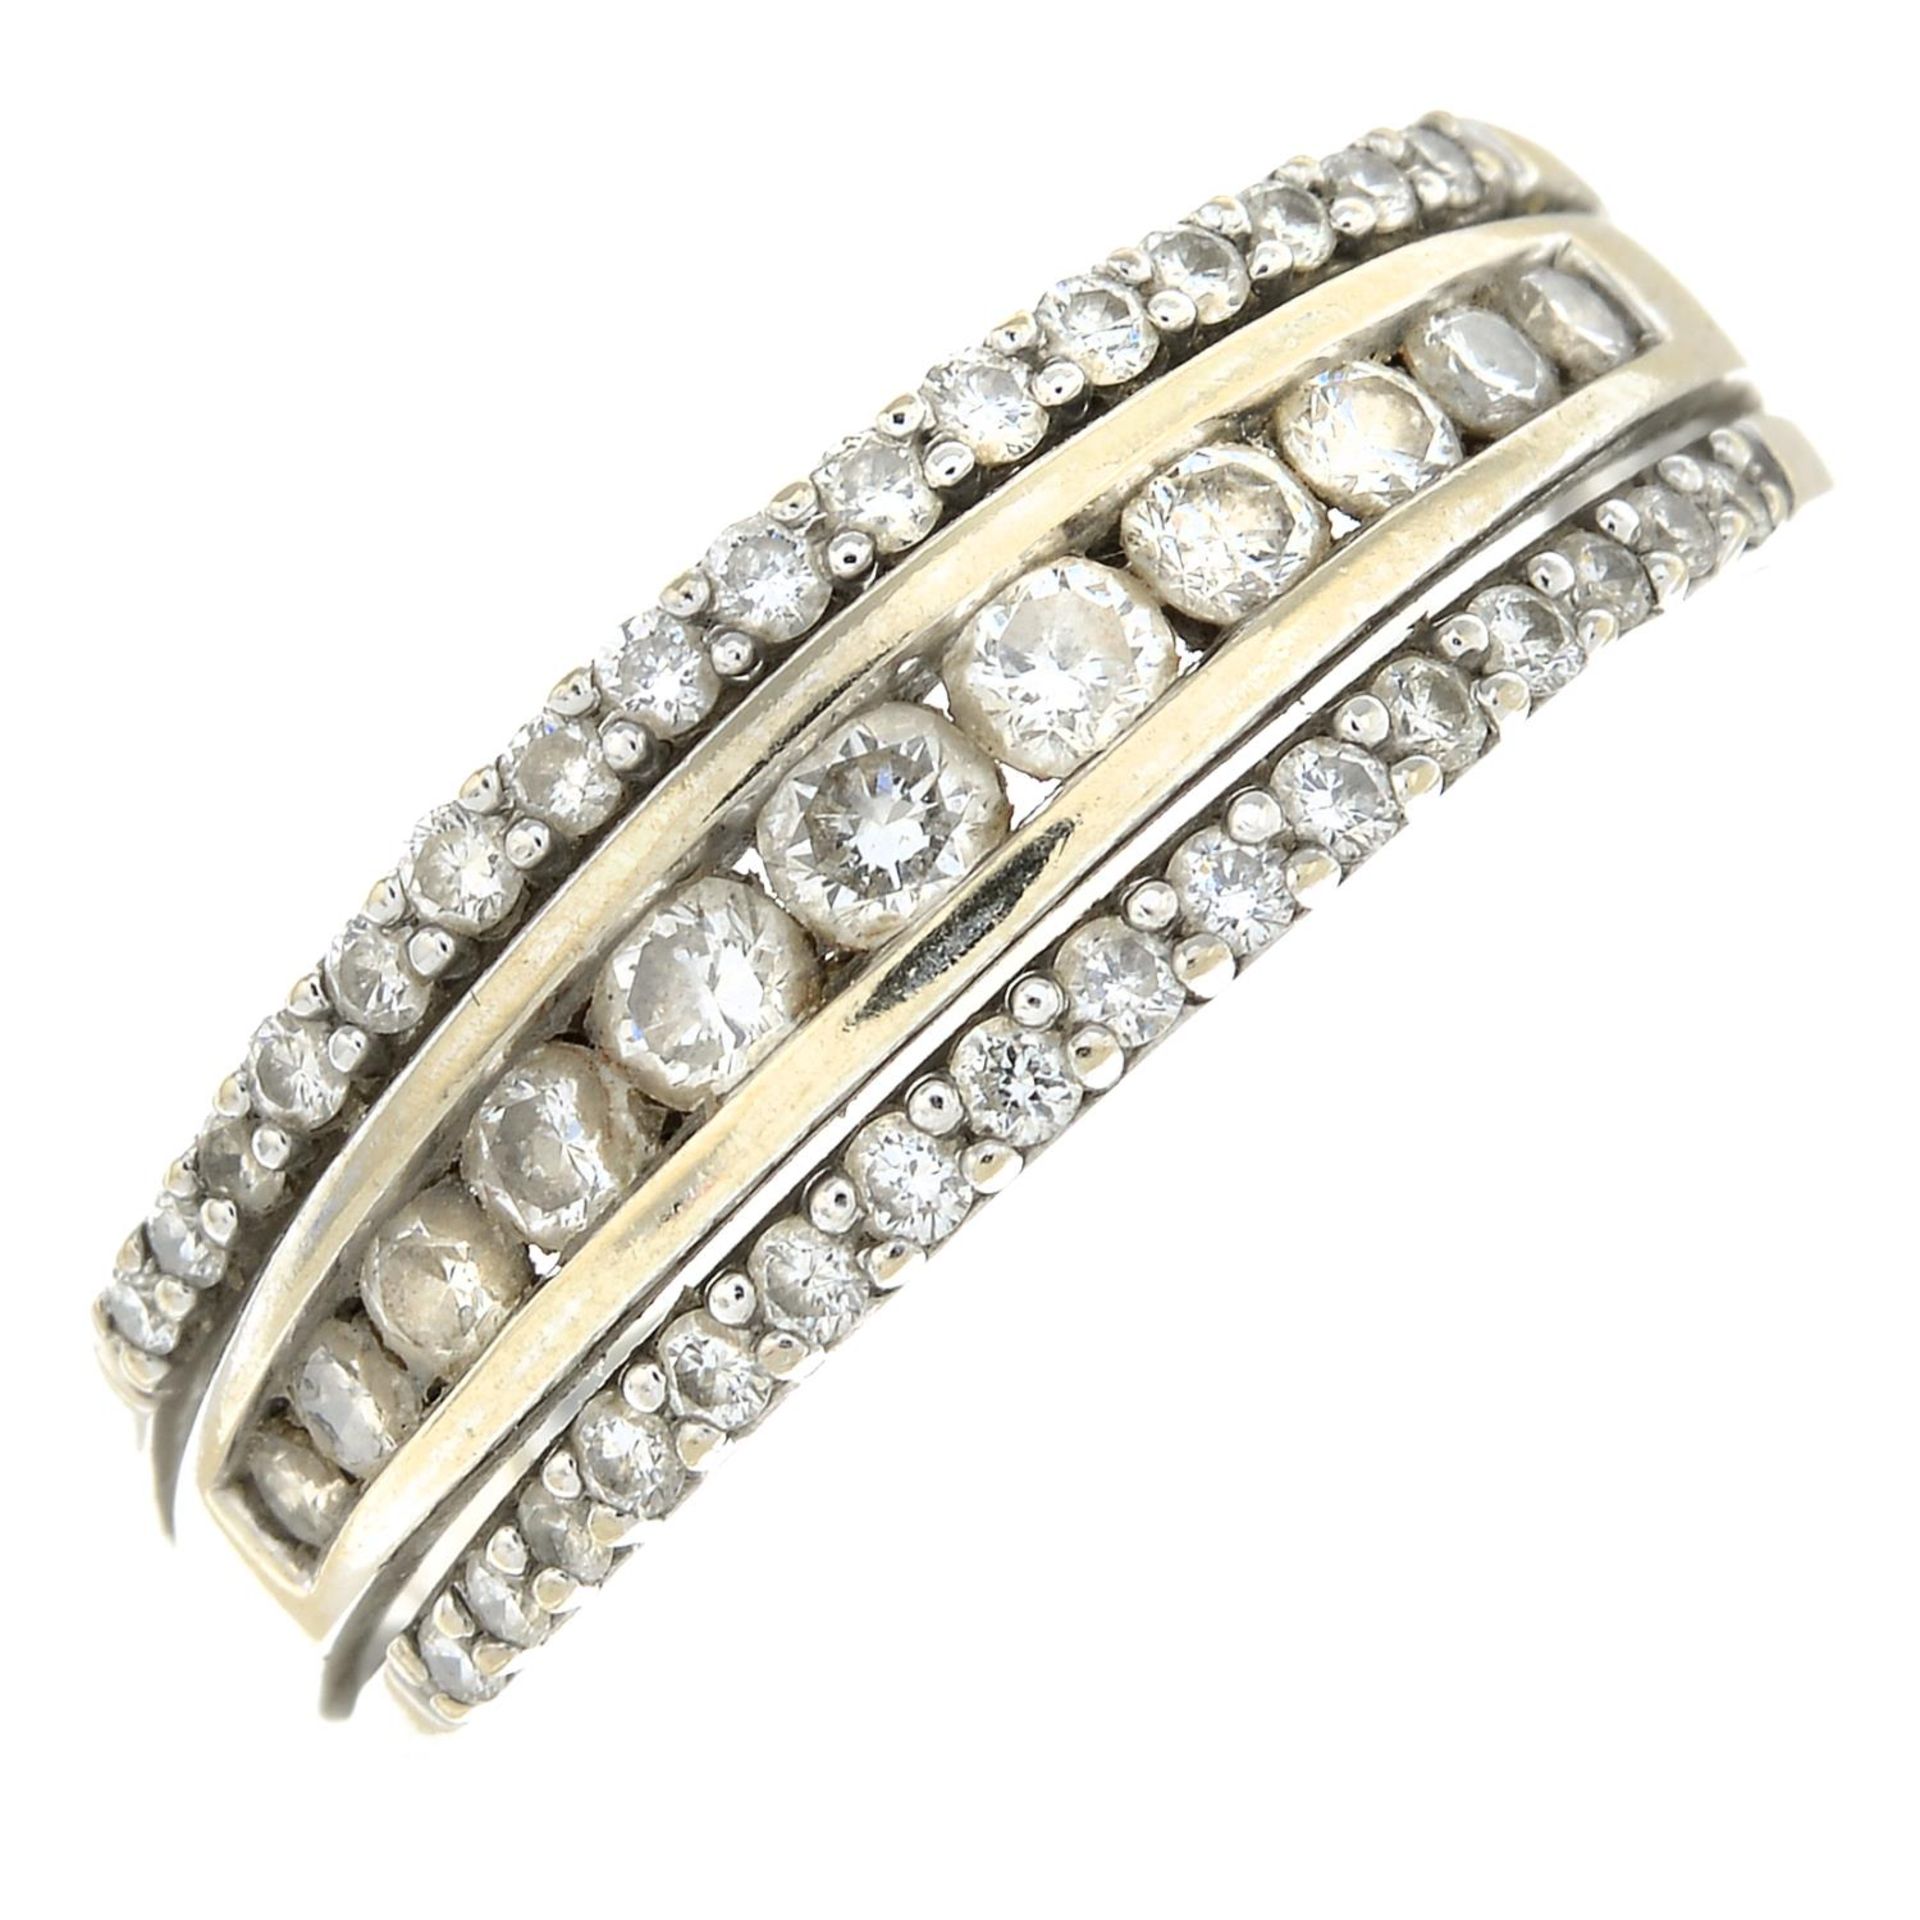 An 18ct gold diamond three-row band ring.Estimated total diamond weight 0.60ct.Hallmarks for